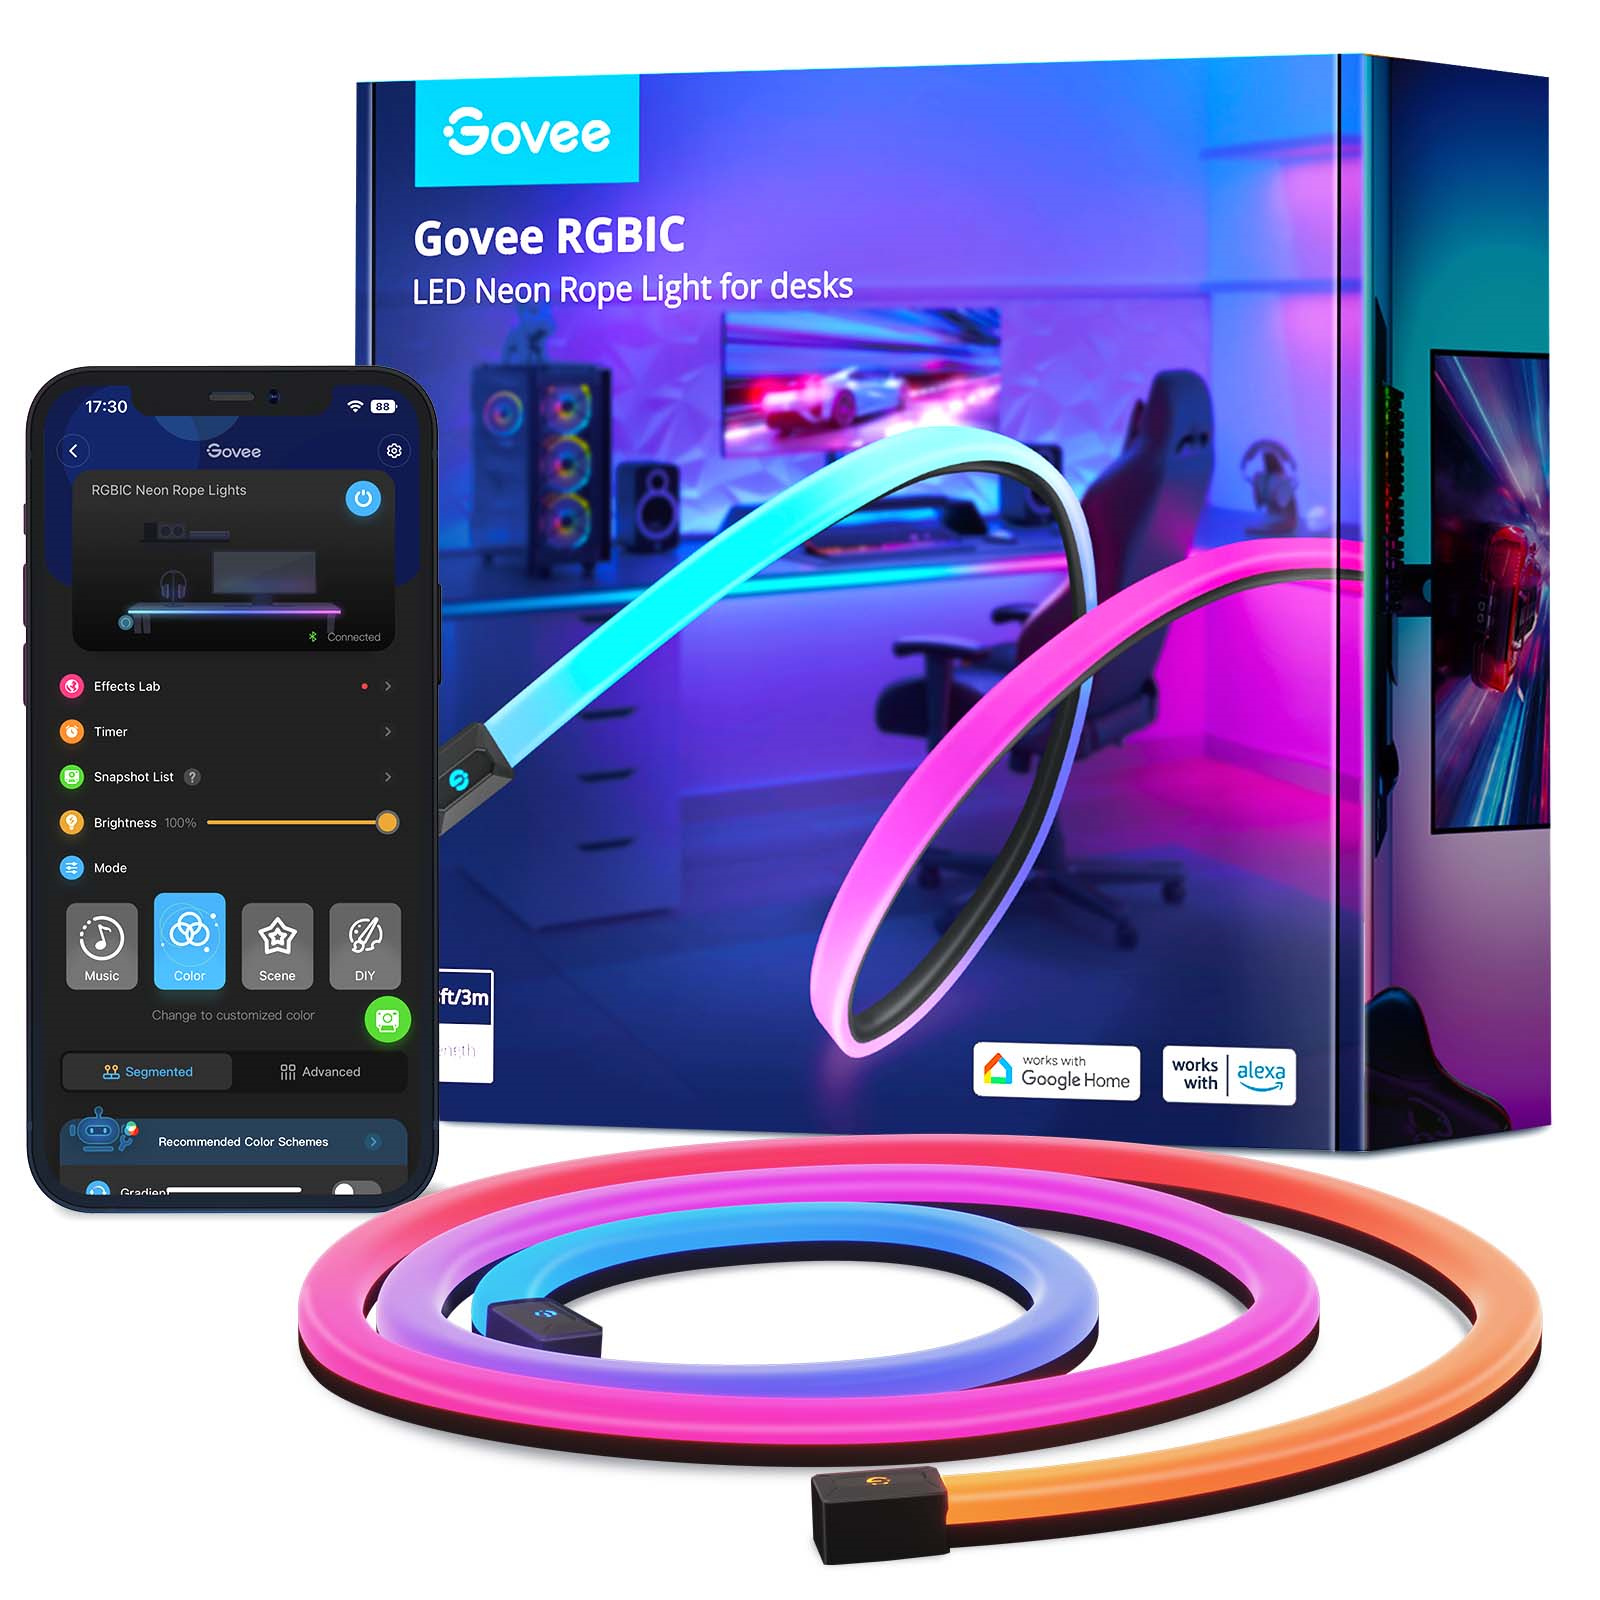 Buy the Govee RGBIC LED Neon Rope Lights for Desks Take your